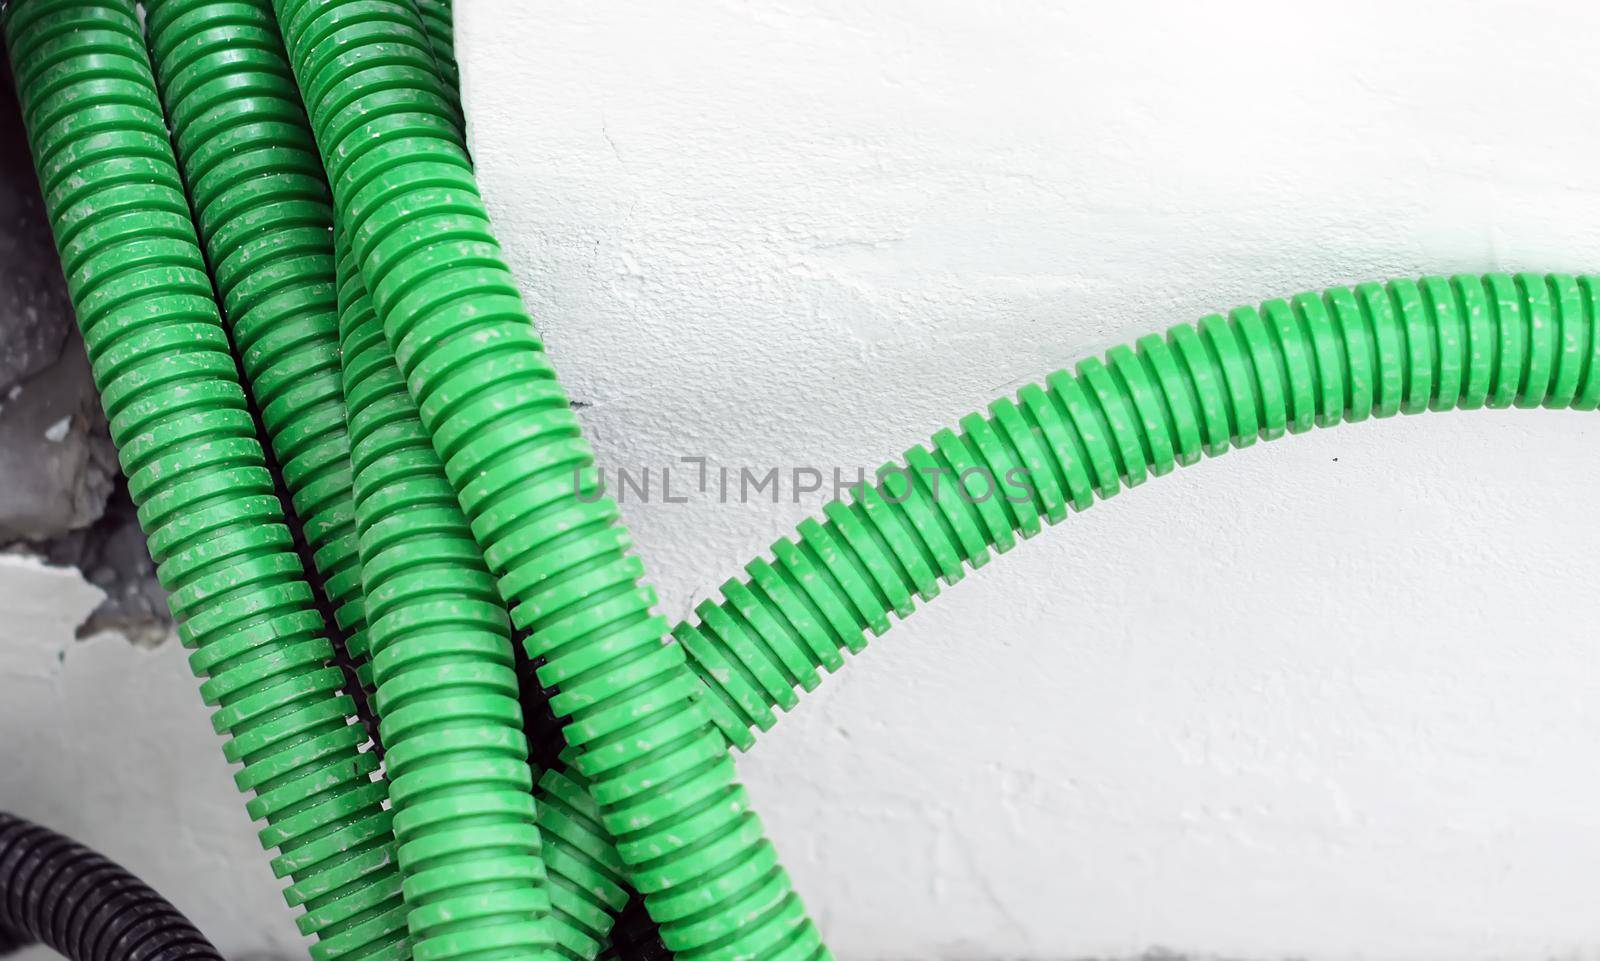 Corrugated tubular conduits ready to be filled with electrical cables on a construction site. White wall in the background. Construction material for securing electrical cables